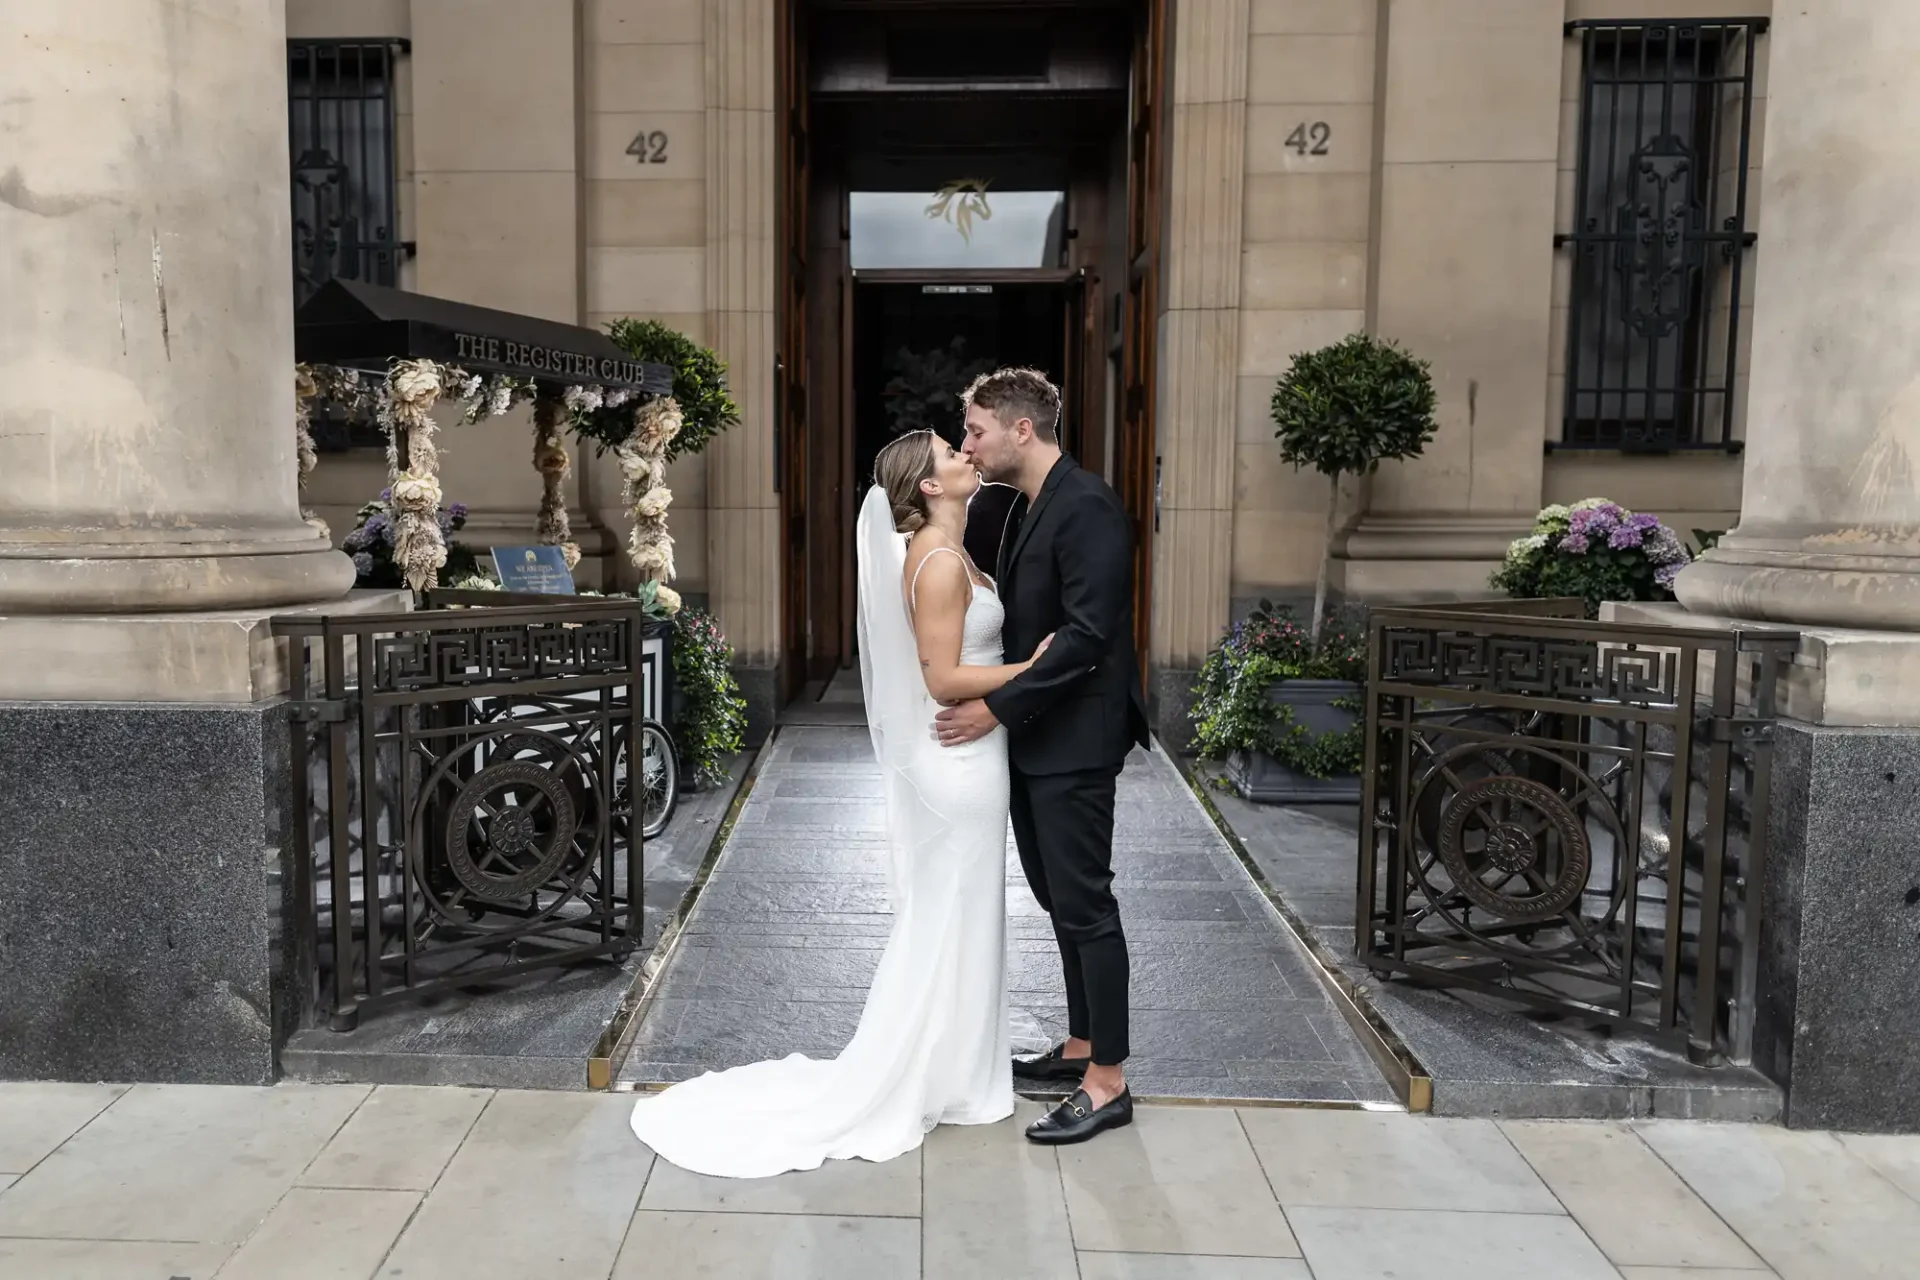 A bride in a white dress and a groom in a black suit kiss in front of a building entrance marked "42," adorned with floral decorations.